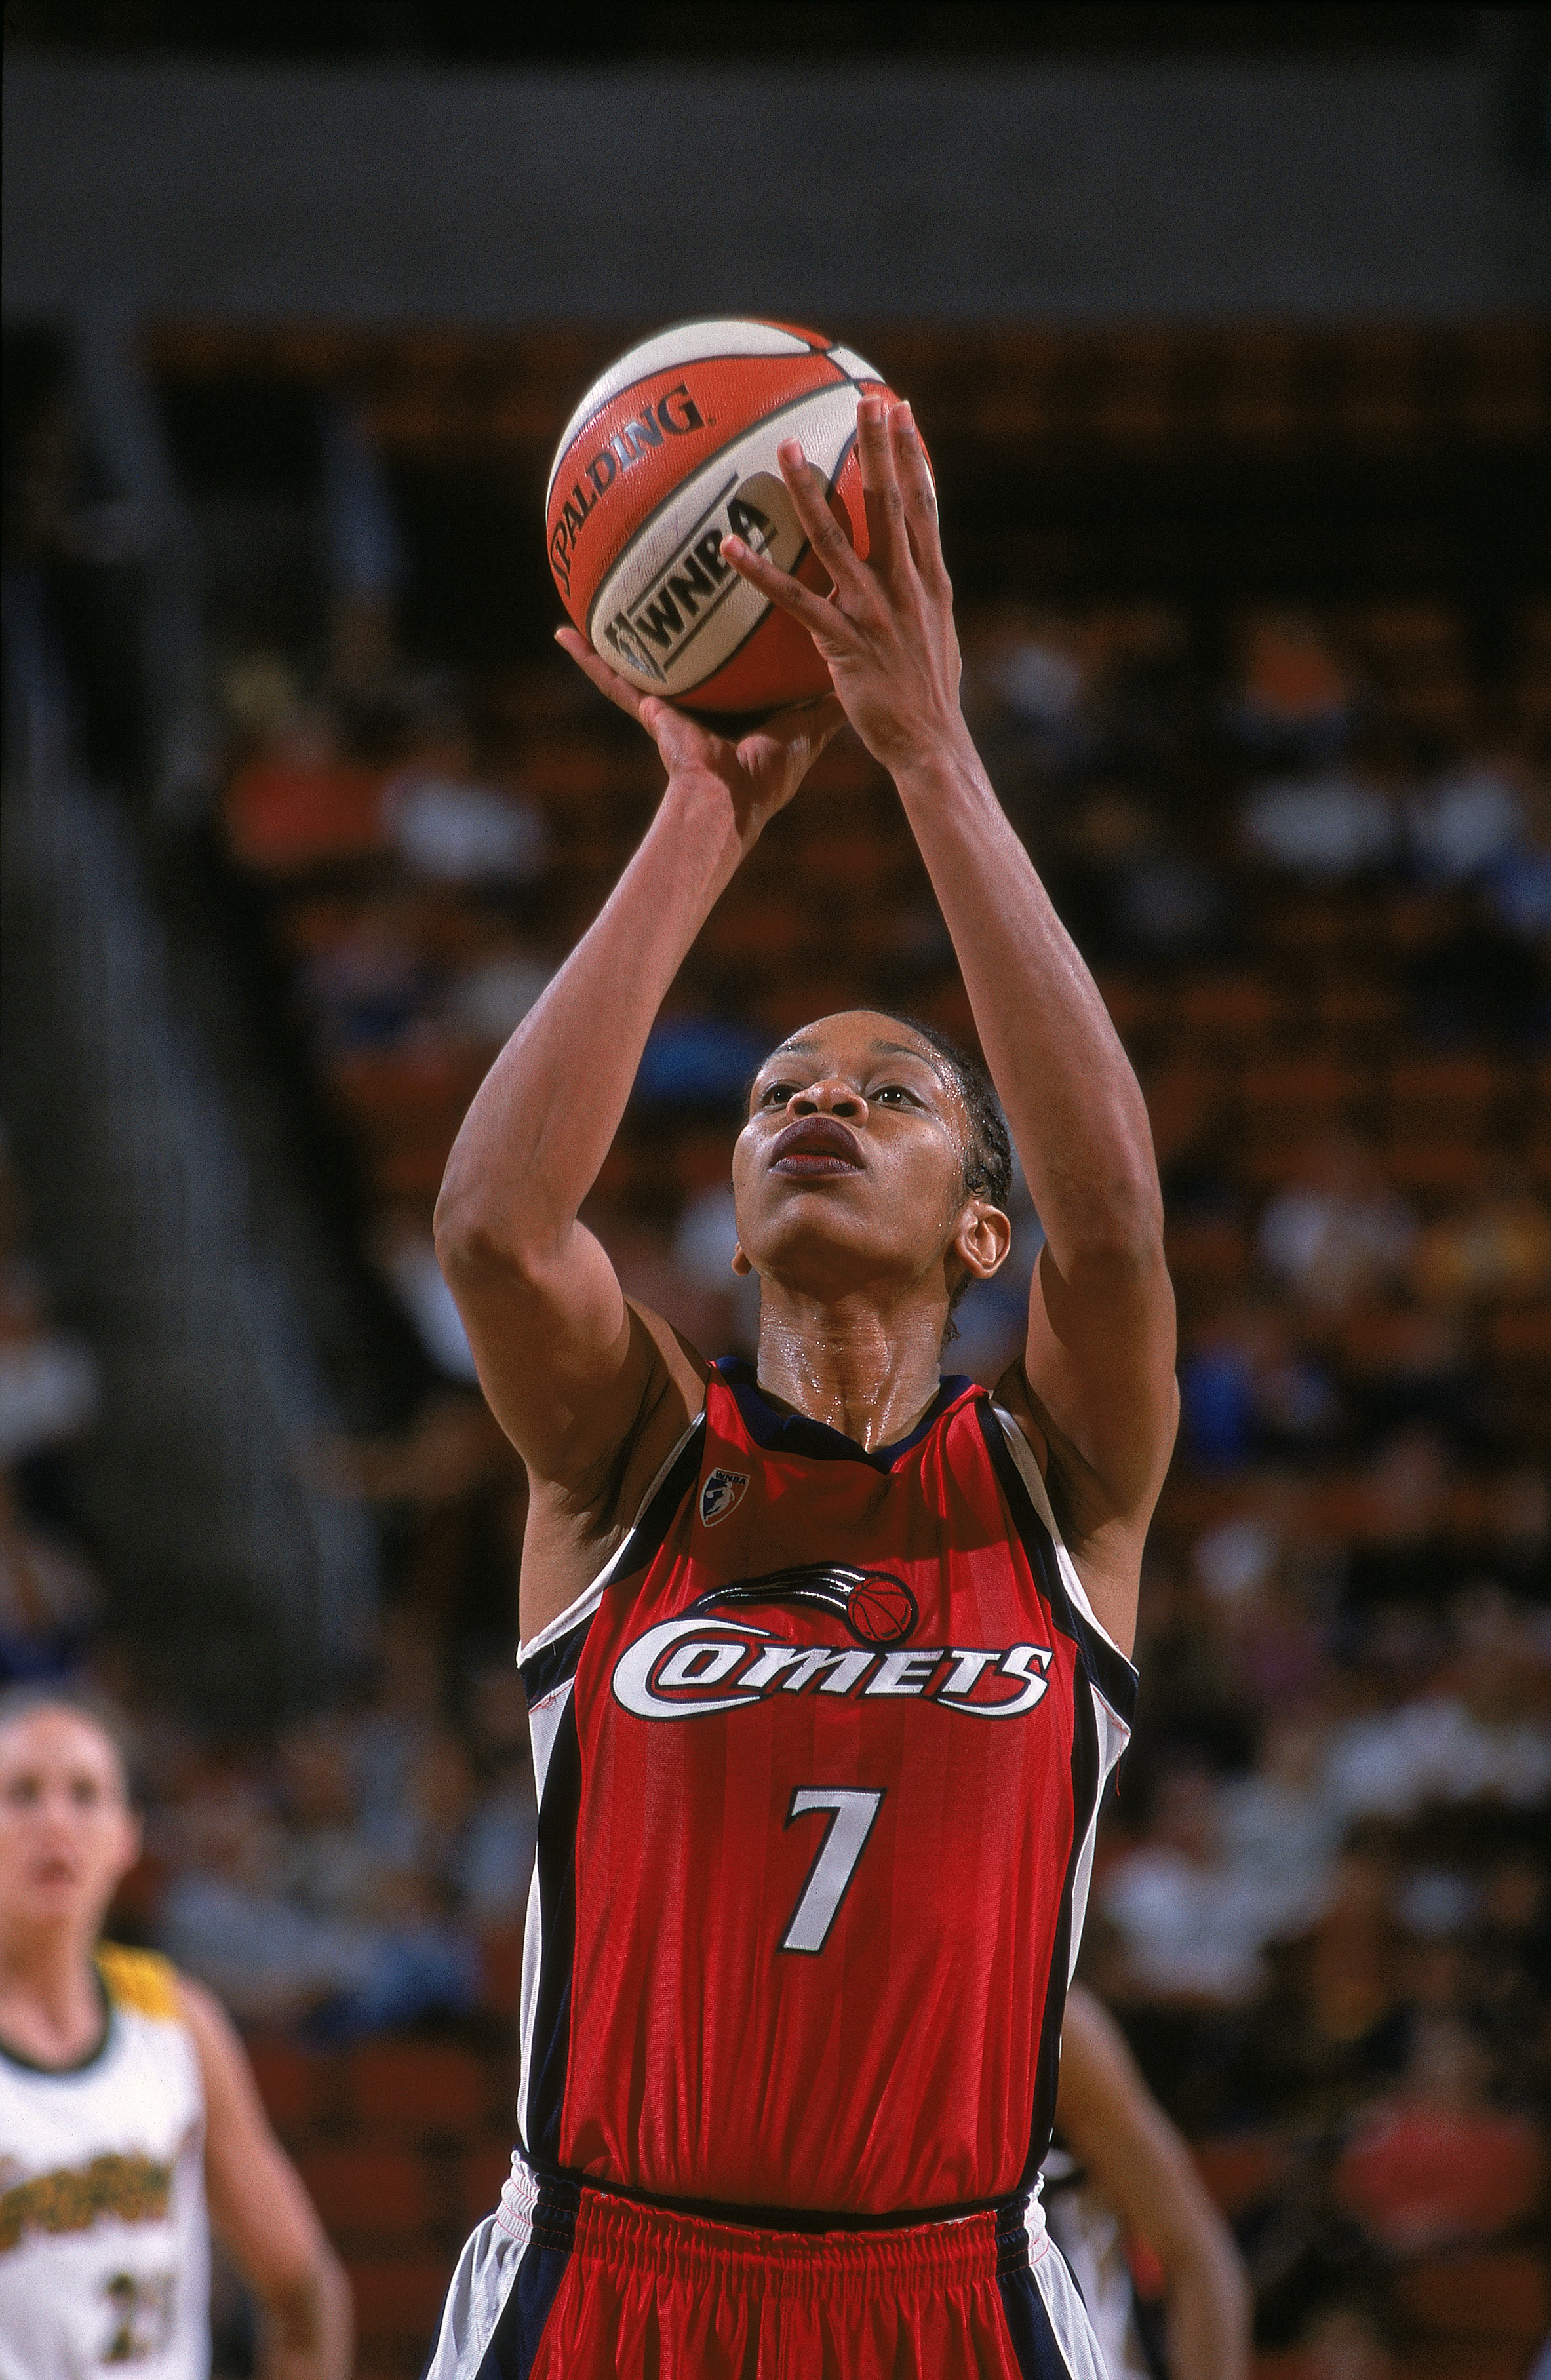 13 Jul 2001:  Tina Thompson #7 of the Houston Comets shooting a free throw during the WNBA game against the Seattle Storm at Key Arena in Seattle, Washington. The Comets defeated the Storm 58-55.  NOTE TO USER: It is expressly understood that the only rig